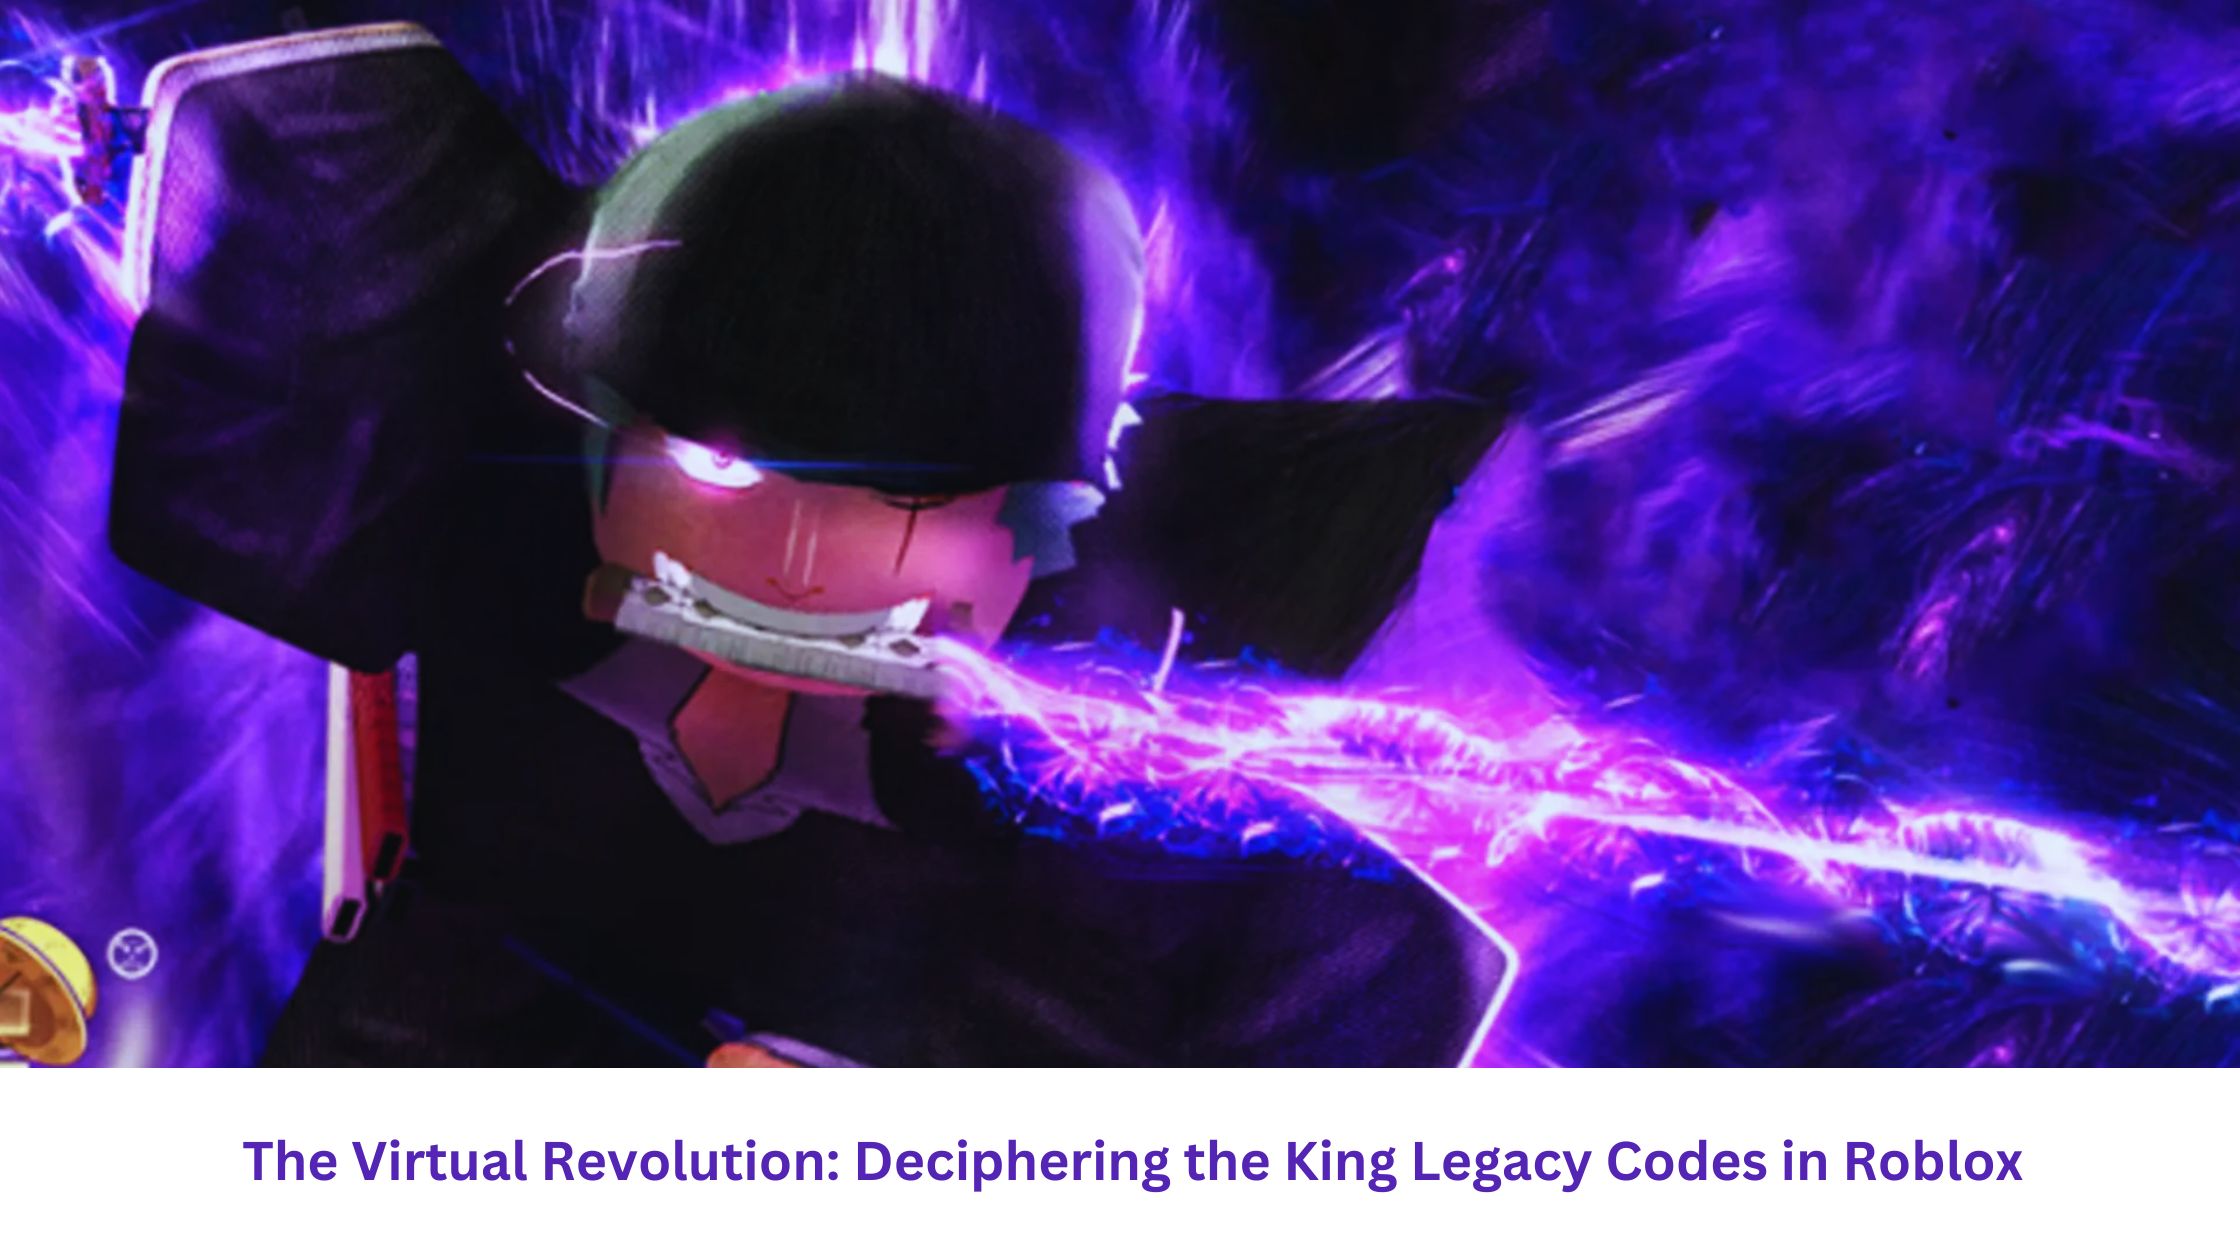 The Virtual Revolution: Deciphering the King Legacy Codes in